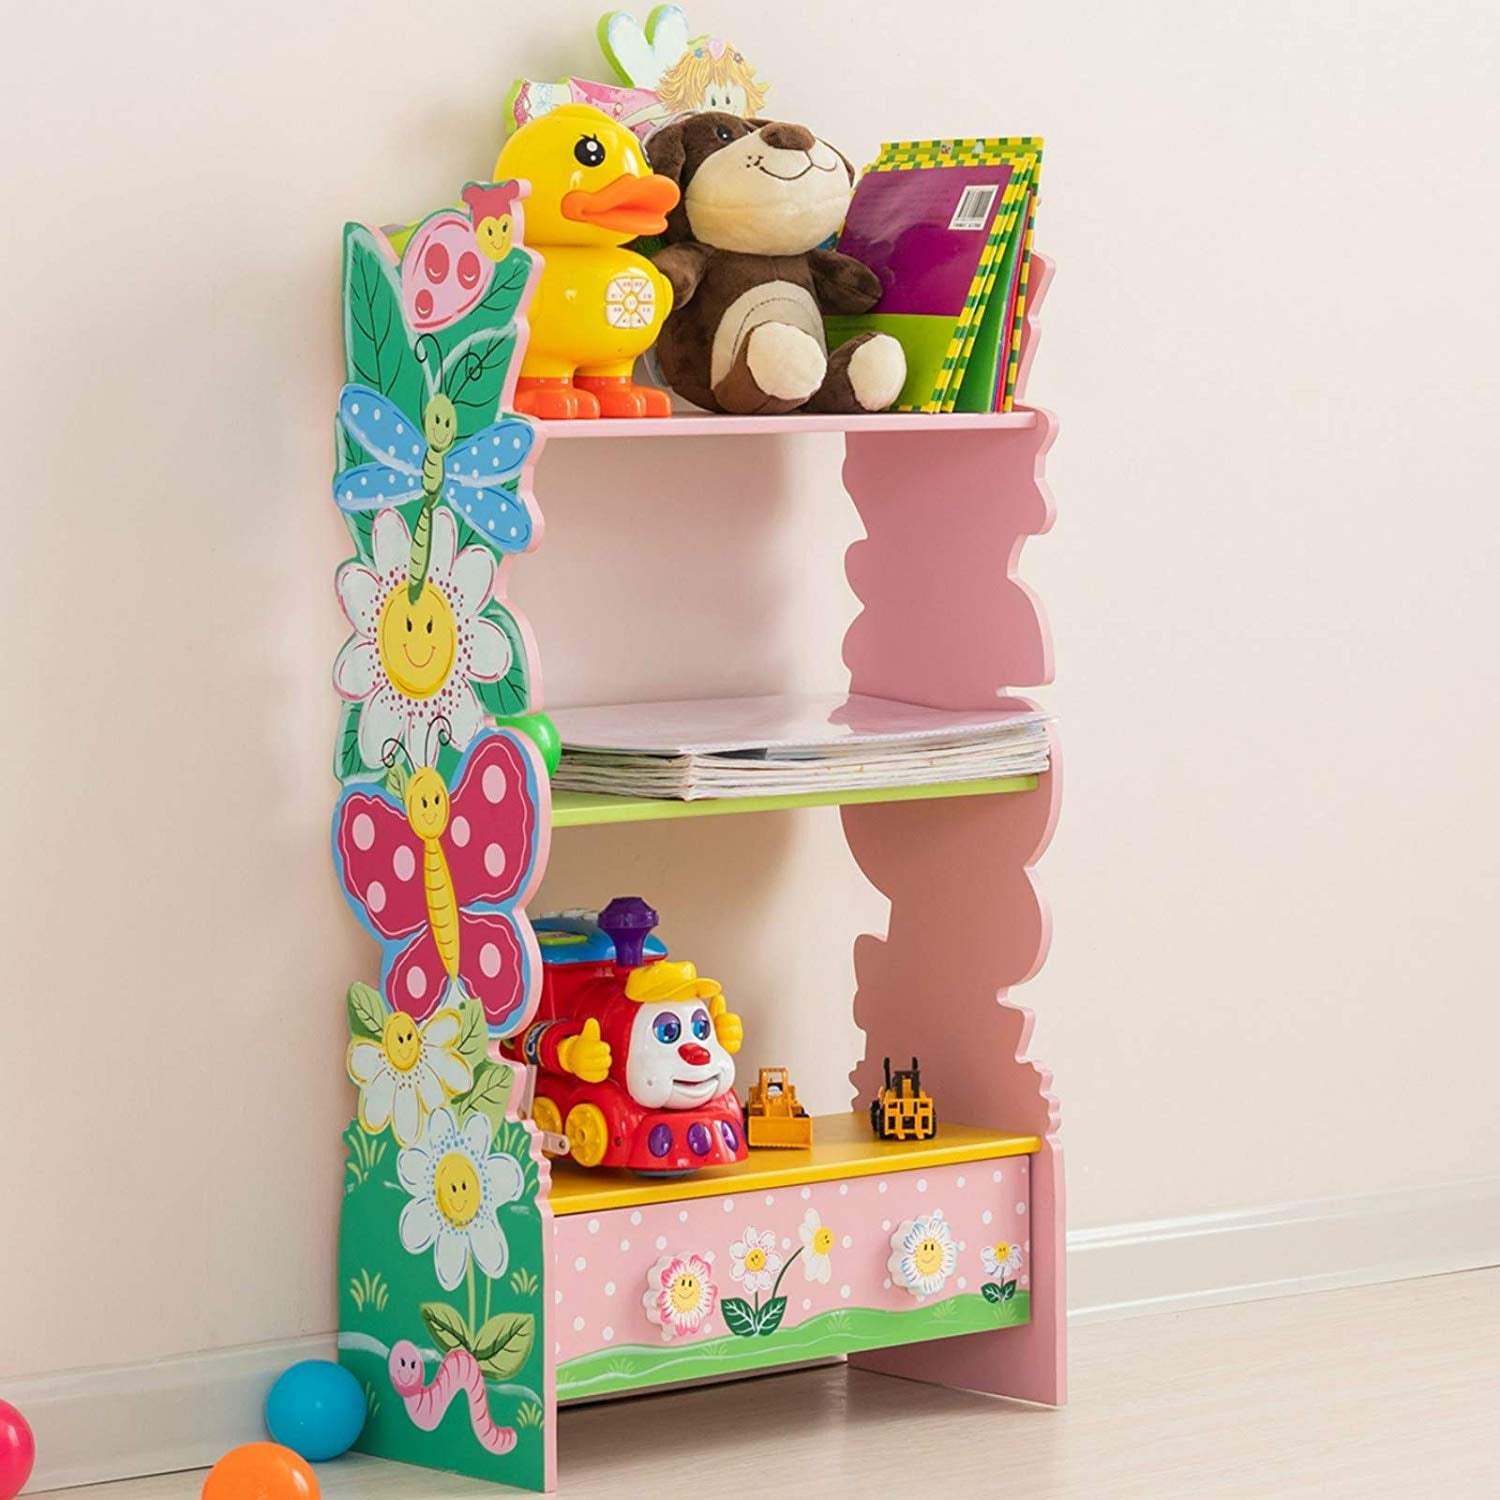 Childrens Kids Wooden Bookcase Storage Rack by Leomark with Stable Jungle Animals Prints Shelf Holder Storage Organizer Display Units for Boys Toddlers Juniors 